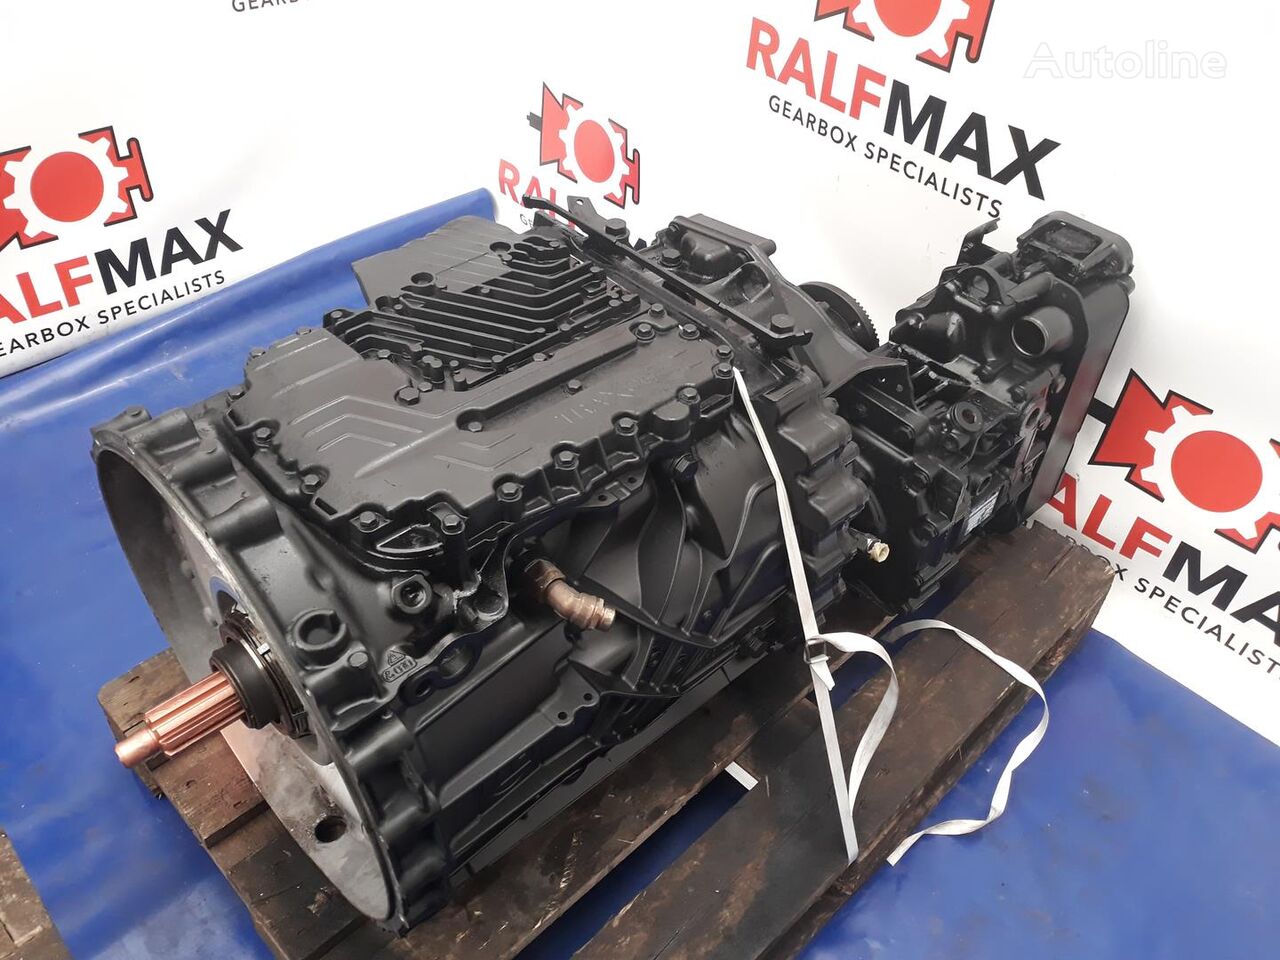 ZF Traxon 12TX2821TD 12 TX 2821 TD gearbox for truck tractor